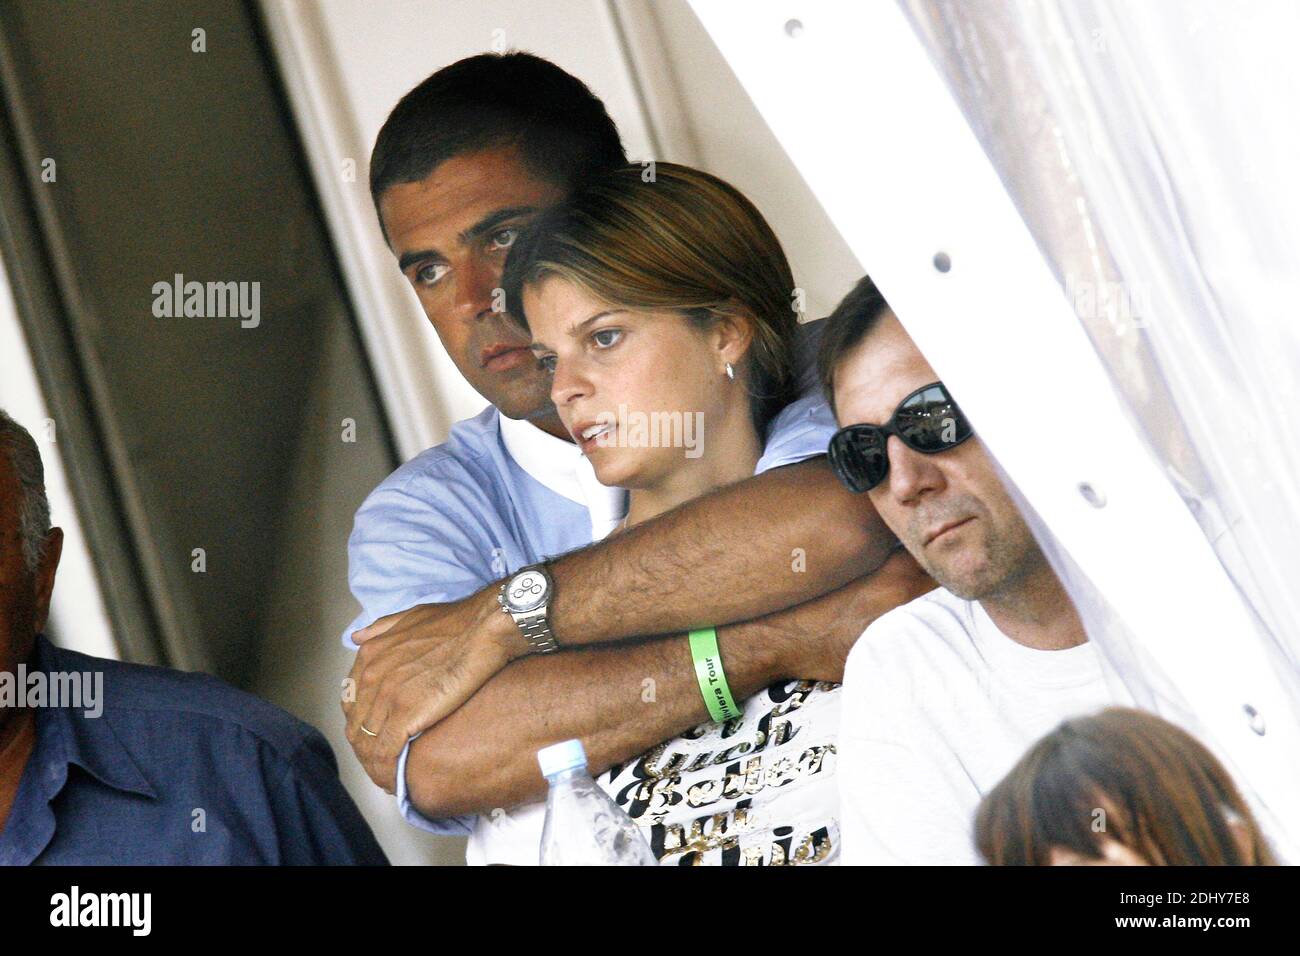 File photo : Greek heiress Athina Onassis and her husband Alvaro Miranda at the International Jumping of Monte-Carlo, Monaco, on June 24, 2006. Athina Onassis and Alvaro de Miranda Neto split after 11-year marriage it was reported. Photo by Thierry Orban/ABACAPRESS.COM Stock Photo